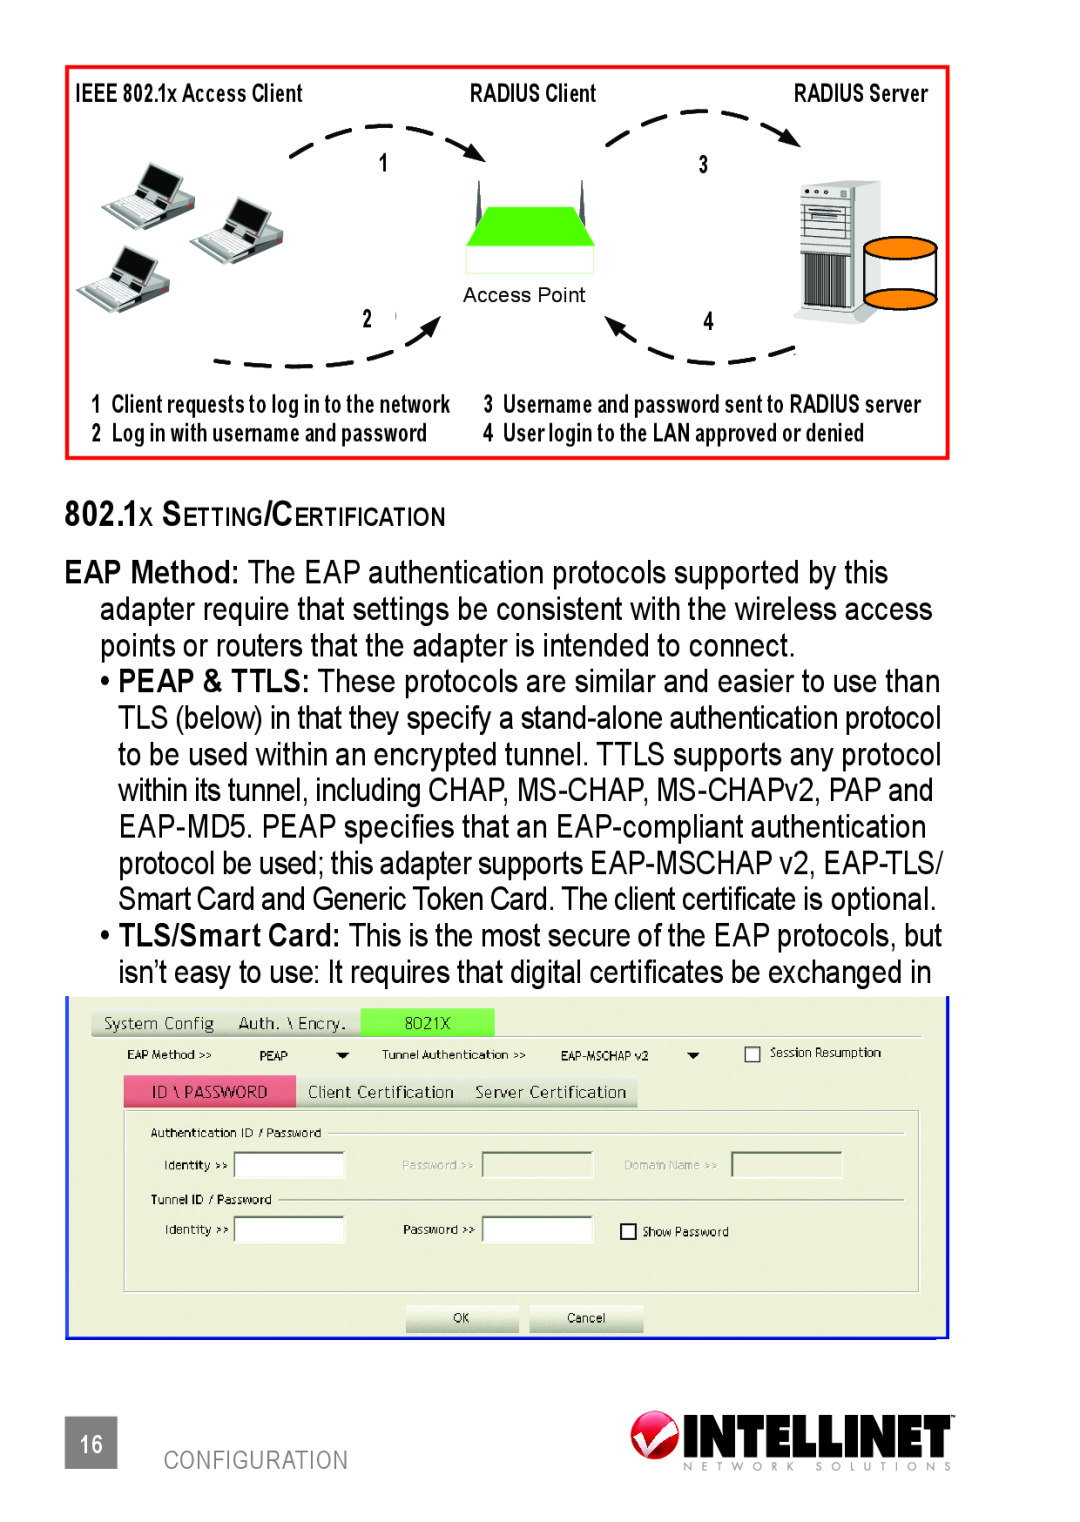 Intellinet Network Solutions 524438 user manual PEAP & TTLS These protocols are similar and easier to use than 